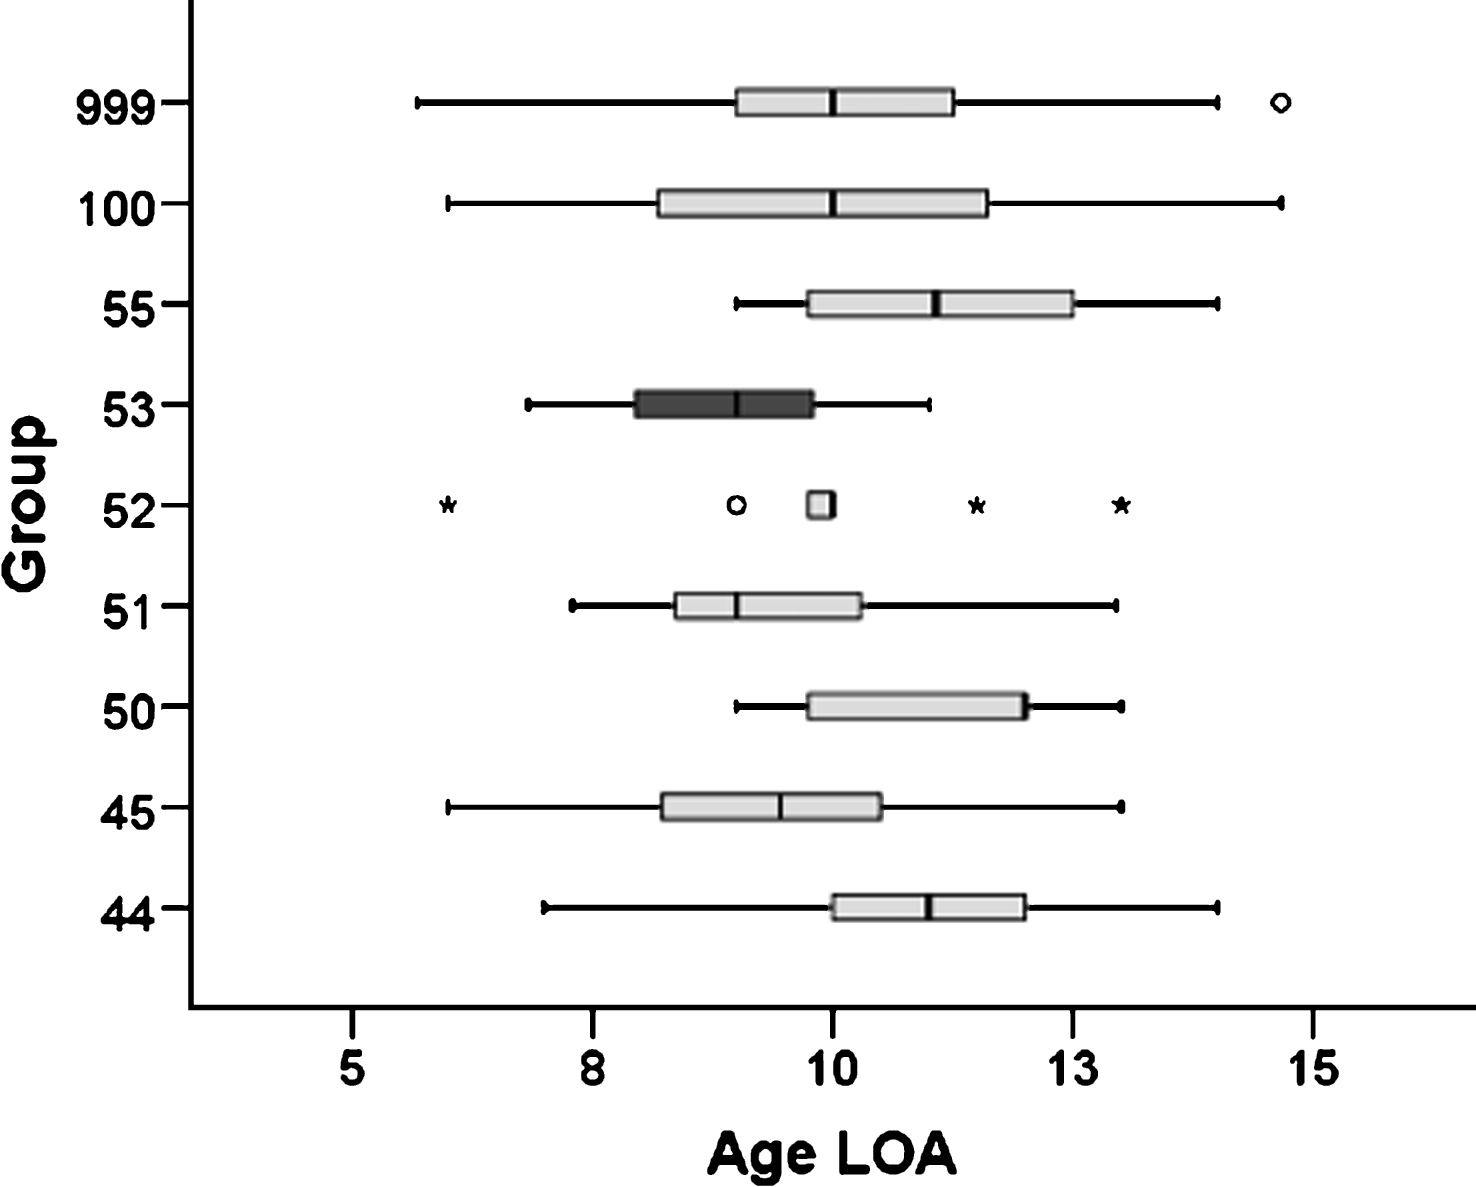 Box-plot of the age at loss of ambulation of DMD patients from -UMD-DMD-Cochin database (Exon 44, 45, 50, 51, 52, 53, 55: patients carrying deletions theoretically treatable by skipping of exon 44, 45, 50, 51, 52, 53 or 55; DelOut45–55: patients carrying a deletion outside the region limited by exons 45 and 55; AllDMD: all DMD mutations; rectangles represent the 25th–75th percentile, the line is the median, ∘: outliers, ★: faroutliers).